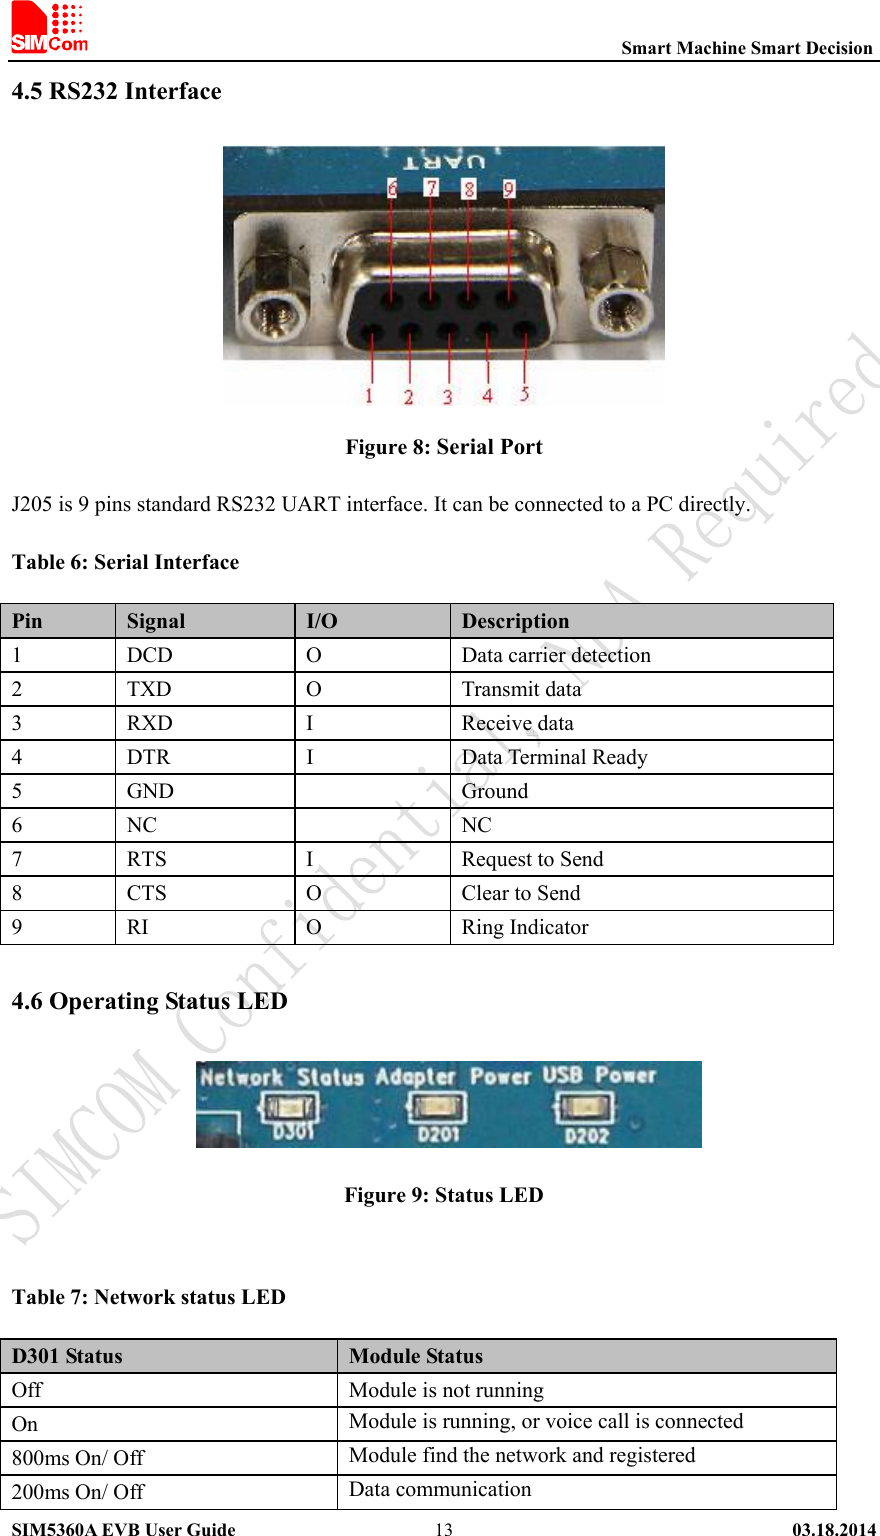                                                          Smart Machine Smart Decision SIM5360A EVB User Guide   03.18.2014   134.5 RS232 Interface  Figure 8: Serial Port J205 is 9 pins standard RS232 UART interface. It can be connected to a PC directly. Table 6: Serial Interface Pin  Signal  I/O  Description 1  DCD  O Data carrier detection 2  TXD  O Transmit data 3  RXD  I Receive data 4  DTR  I Data Terminal Ready 5  GND    Ground 6  NC    NC 7  RTS  I Request to Send 8  CTS  O Clear to Send 9  RI  O Ring Indicator 4.6 Operating Status LED    Figure 9: Status LED  Table 7: Network status LED D301 Status  Module Status Off  Module is not running On  Module is running, or voice call is connected 800ms On/ Off  Module find the network and registered 200ms On/ Off  Data communication 